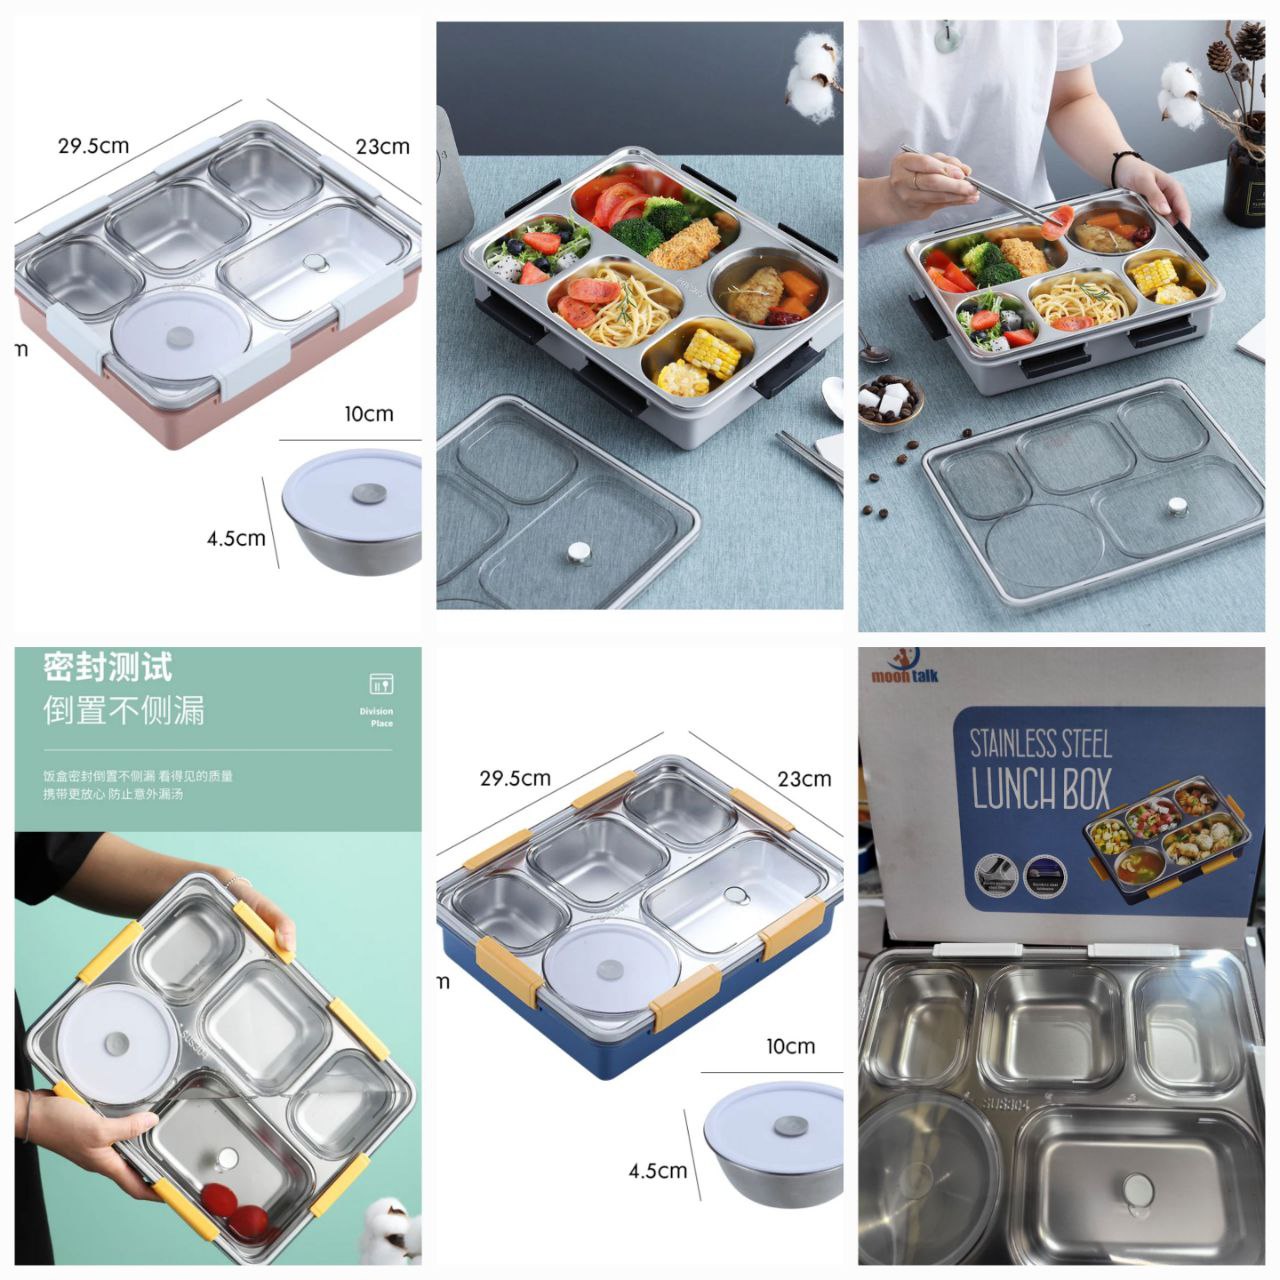 STAINLESS STEEL LUNCHBOX (5 SECTION) JL0007